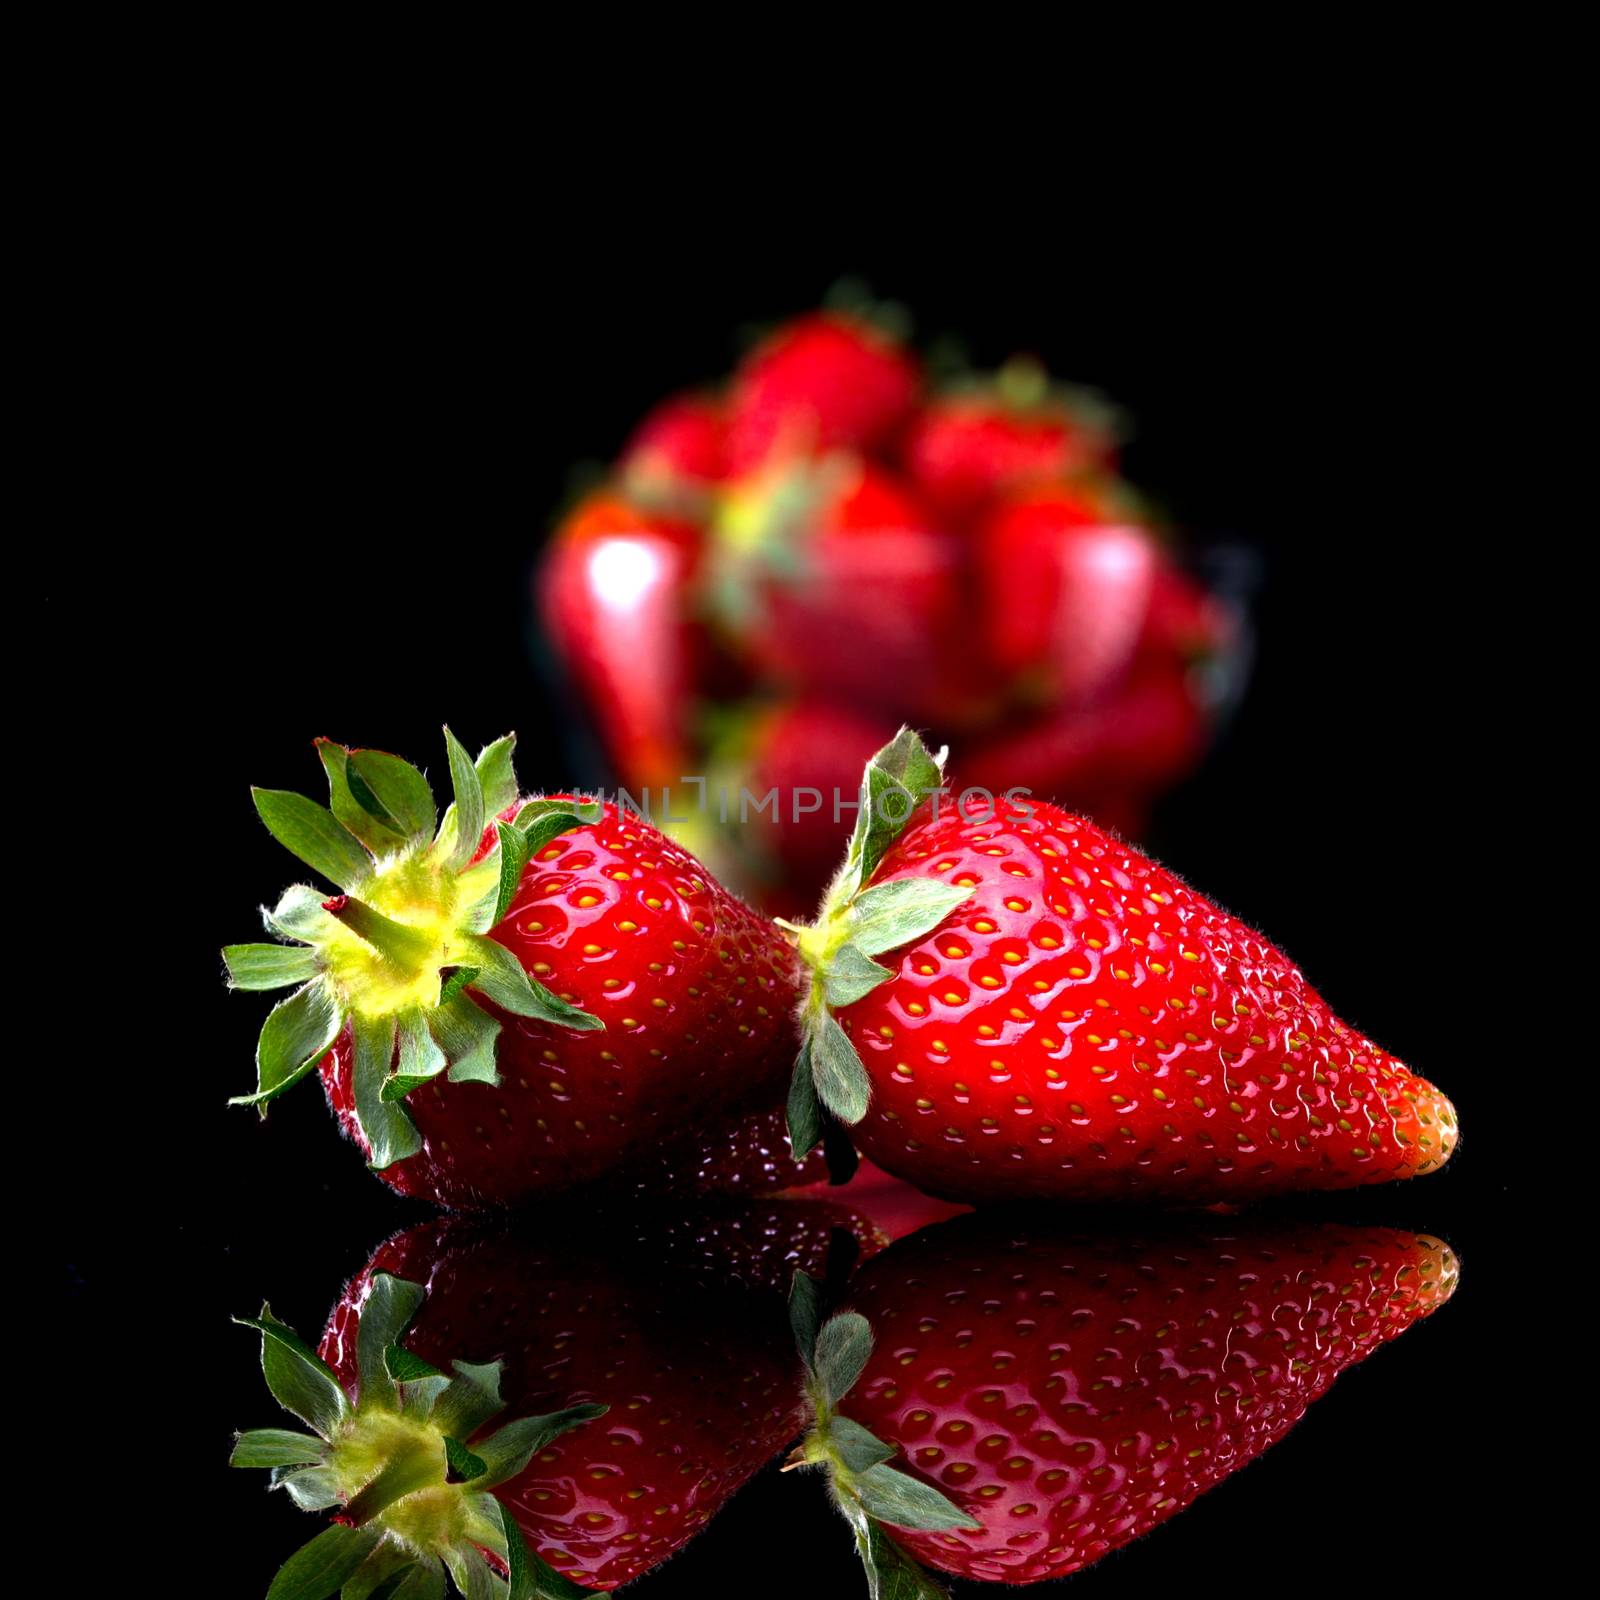 Delicious juicy summer strawberries on black backgound.